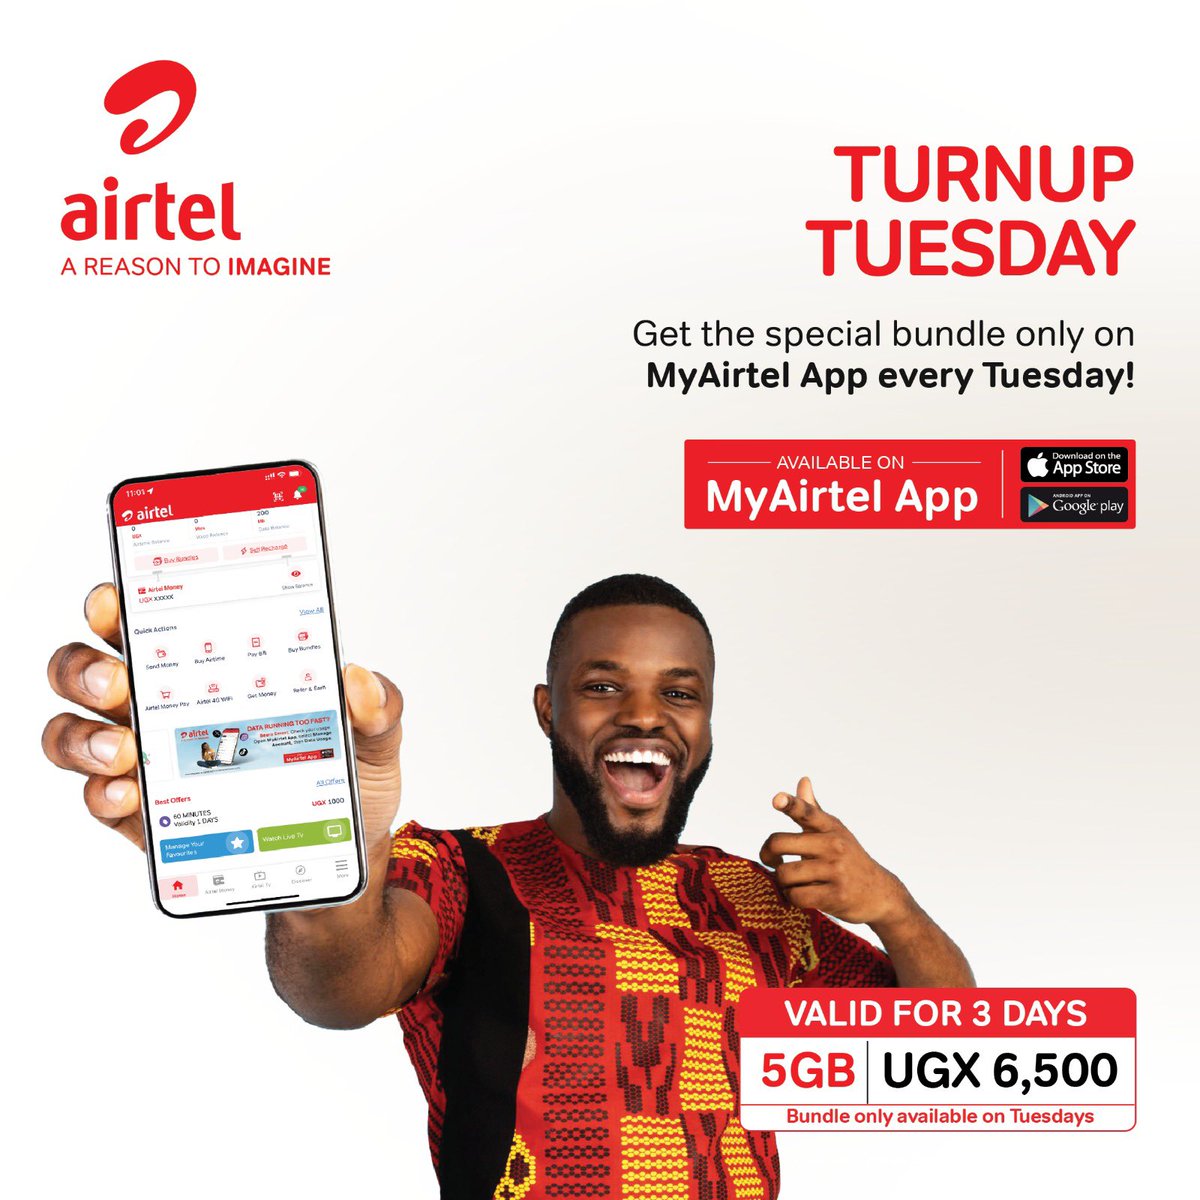 It’s still Tuesday 🌚 Get 5GB at UGX 6,500 valid for 3 days with the TurnUp Tuesday bundle only on the #MyAirtelApp only on Tuesday Follow the link to subscribe; airtelafrica.onelink.me/cGyr/airtelapp #TurnUpTuesday